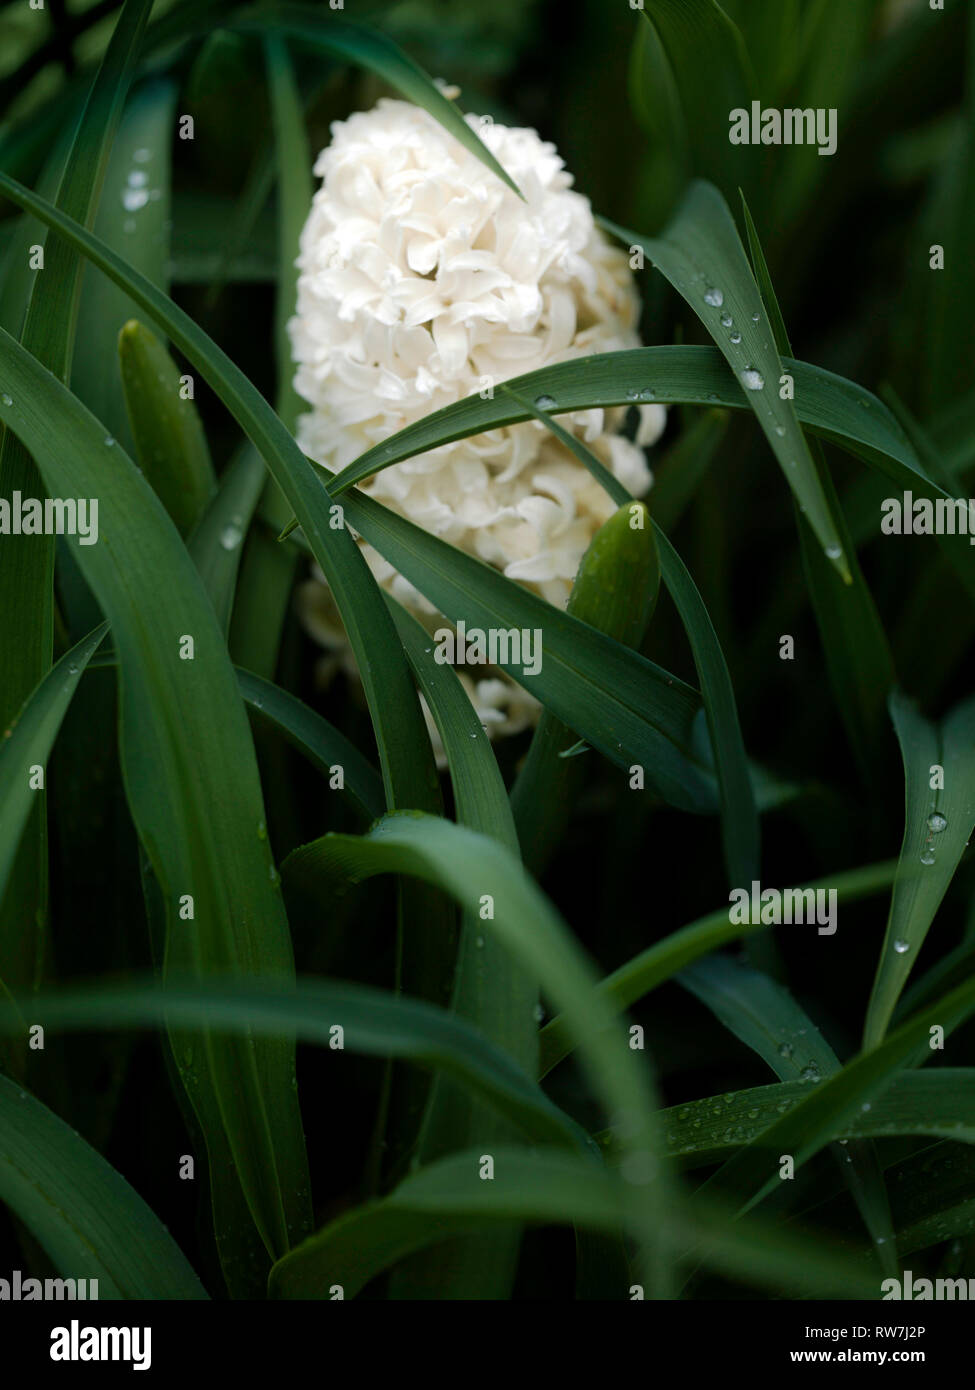 White Hyacinth Bloom Nestled Amongst Green Leaves with Raindrops Stock Photo